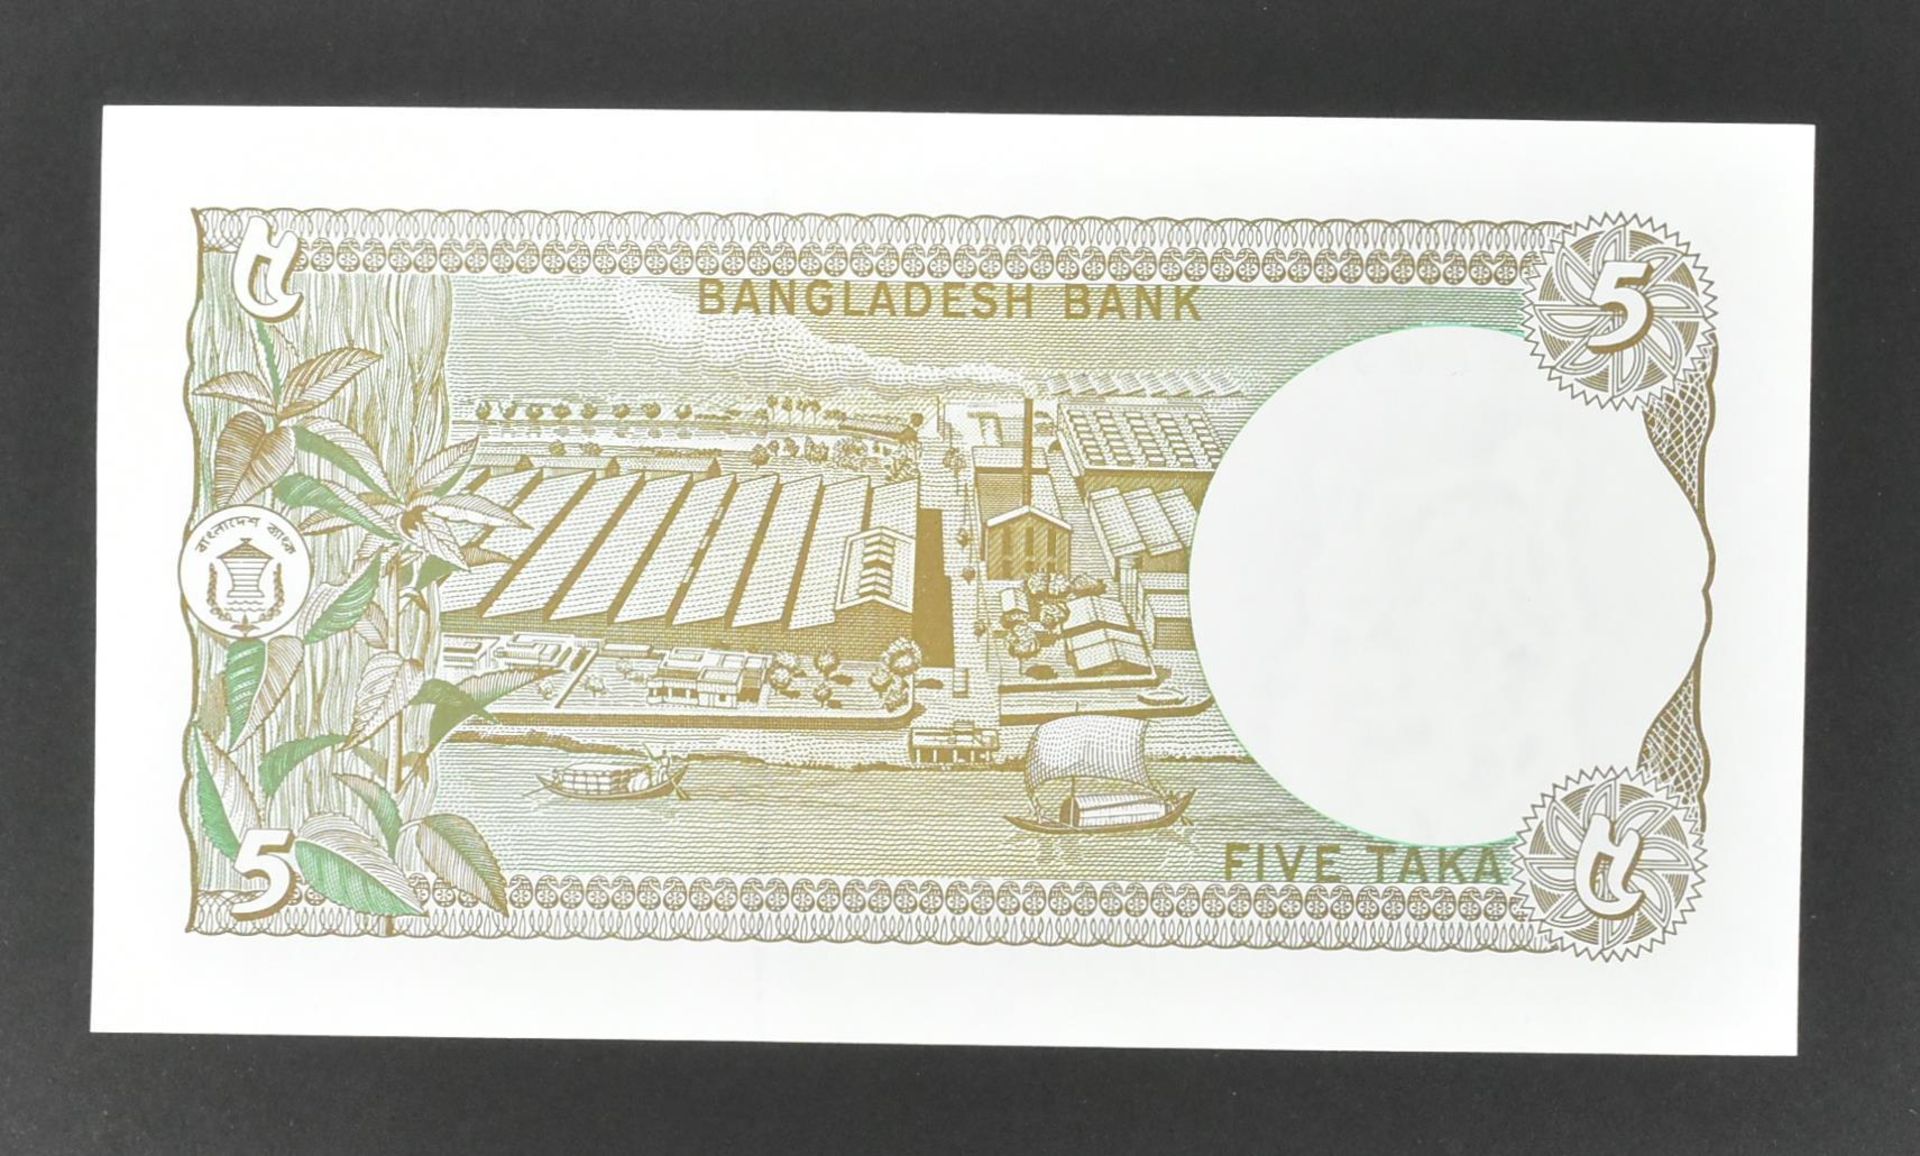 COLLECTION OF INTERNATIONAL UNCIRCULATED BANK NOTES - OMAN - Image 38 of 51